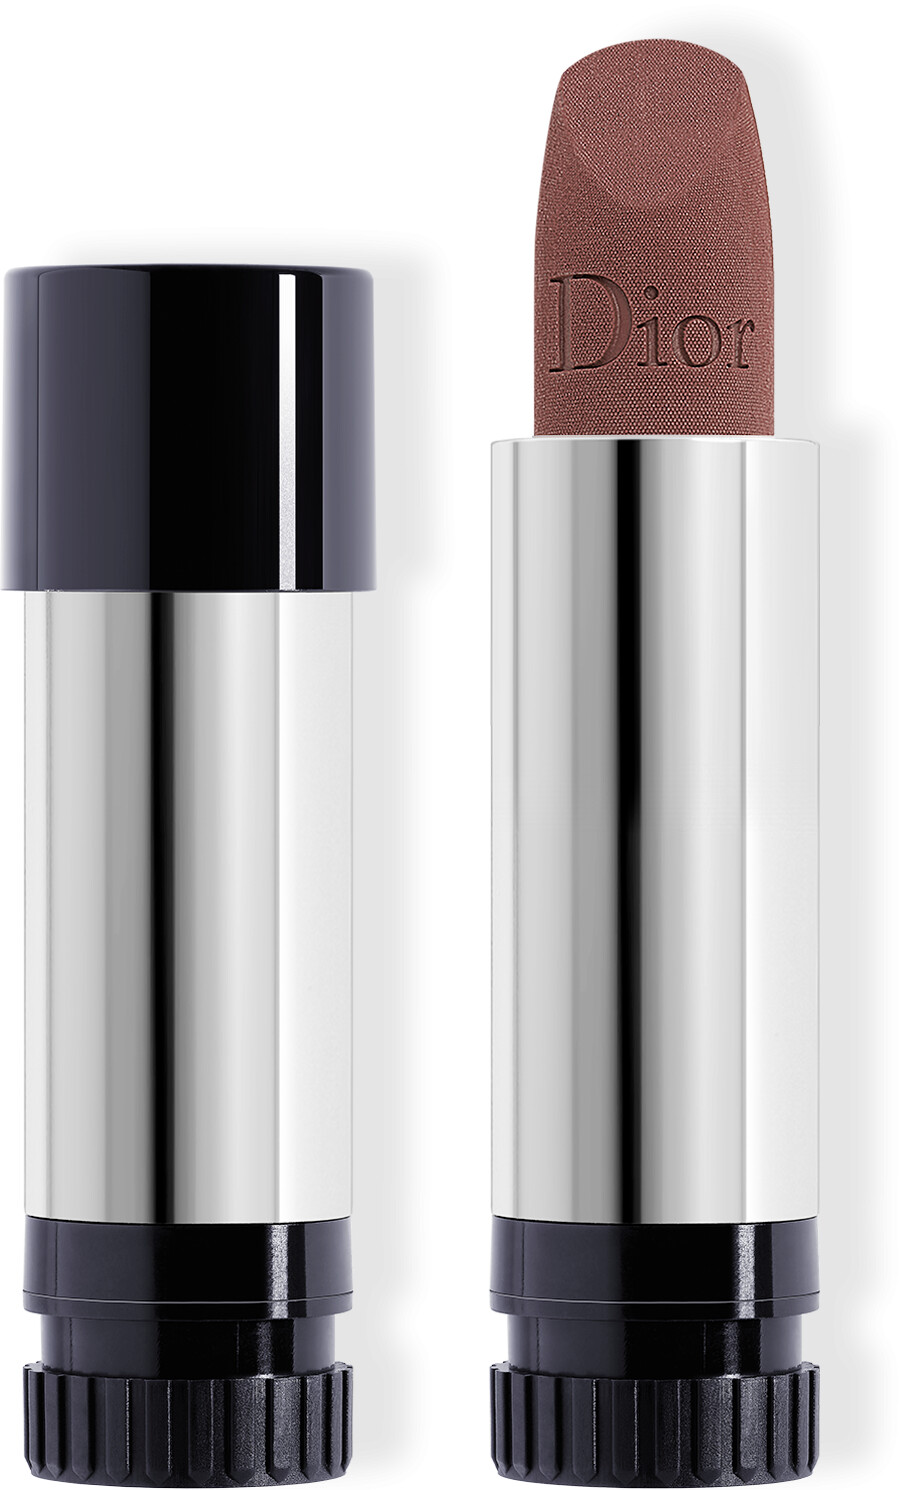 DIOR Rouge Dior Lipstick Refill 3.5g 300 - Nude Style - Velvet